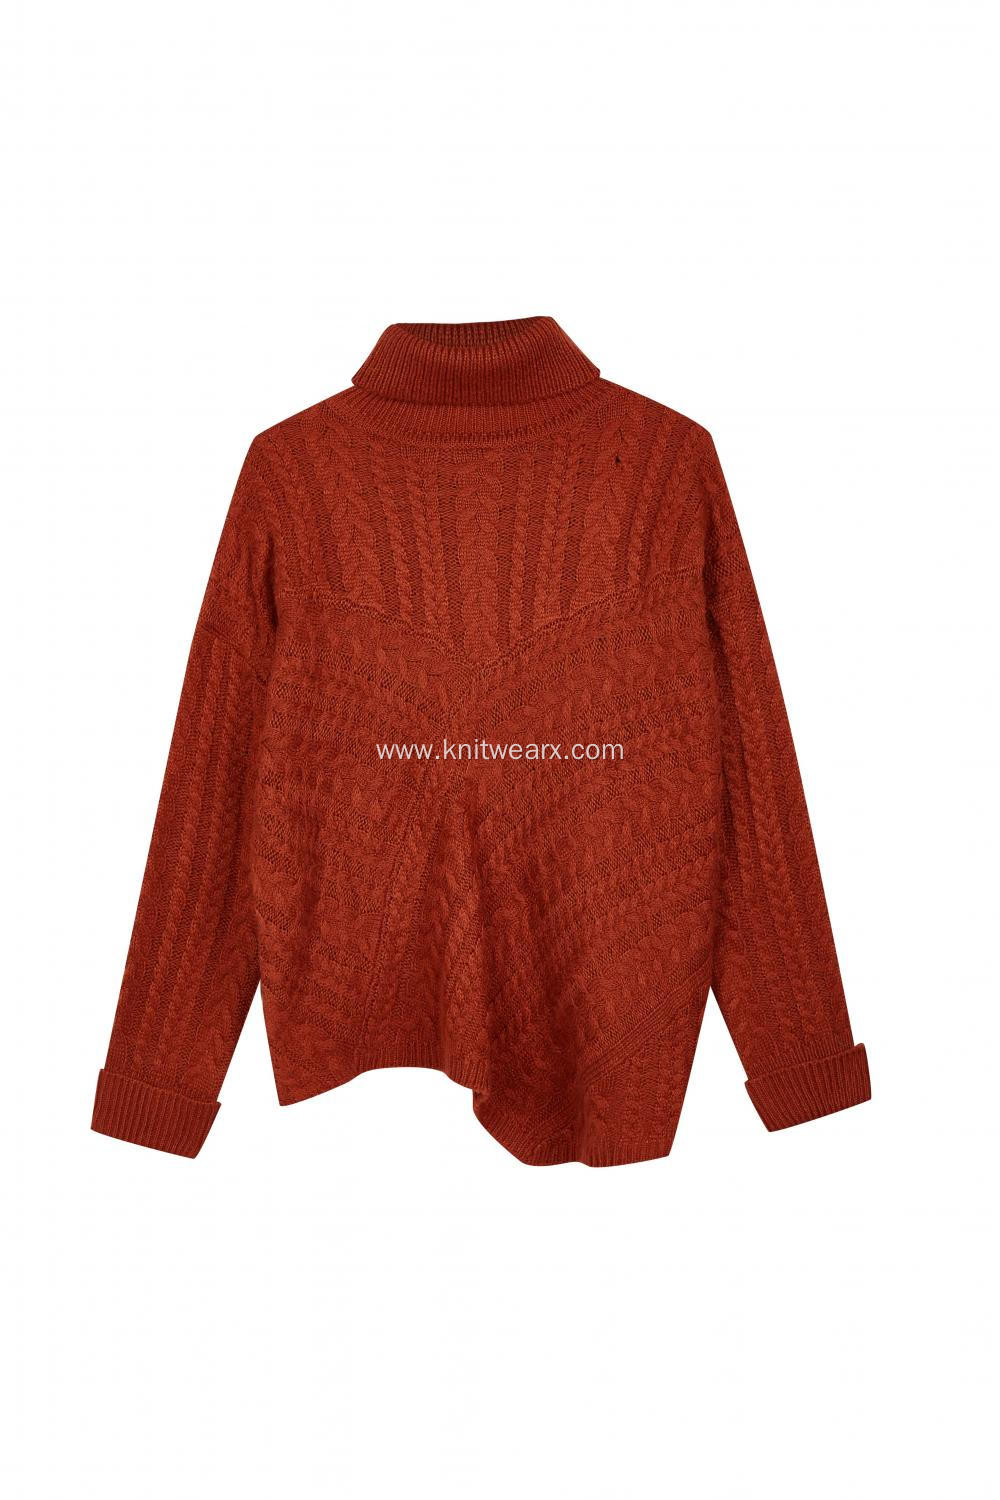 Women's Knitted Turtleneck Cable Asymmetric Hem Pullover